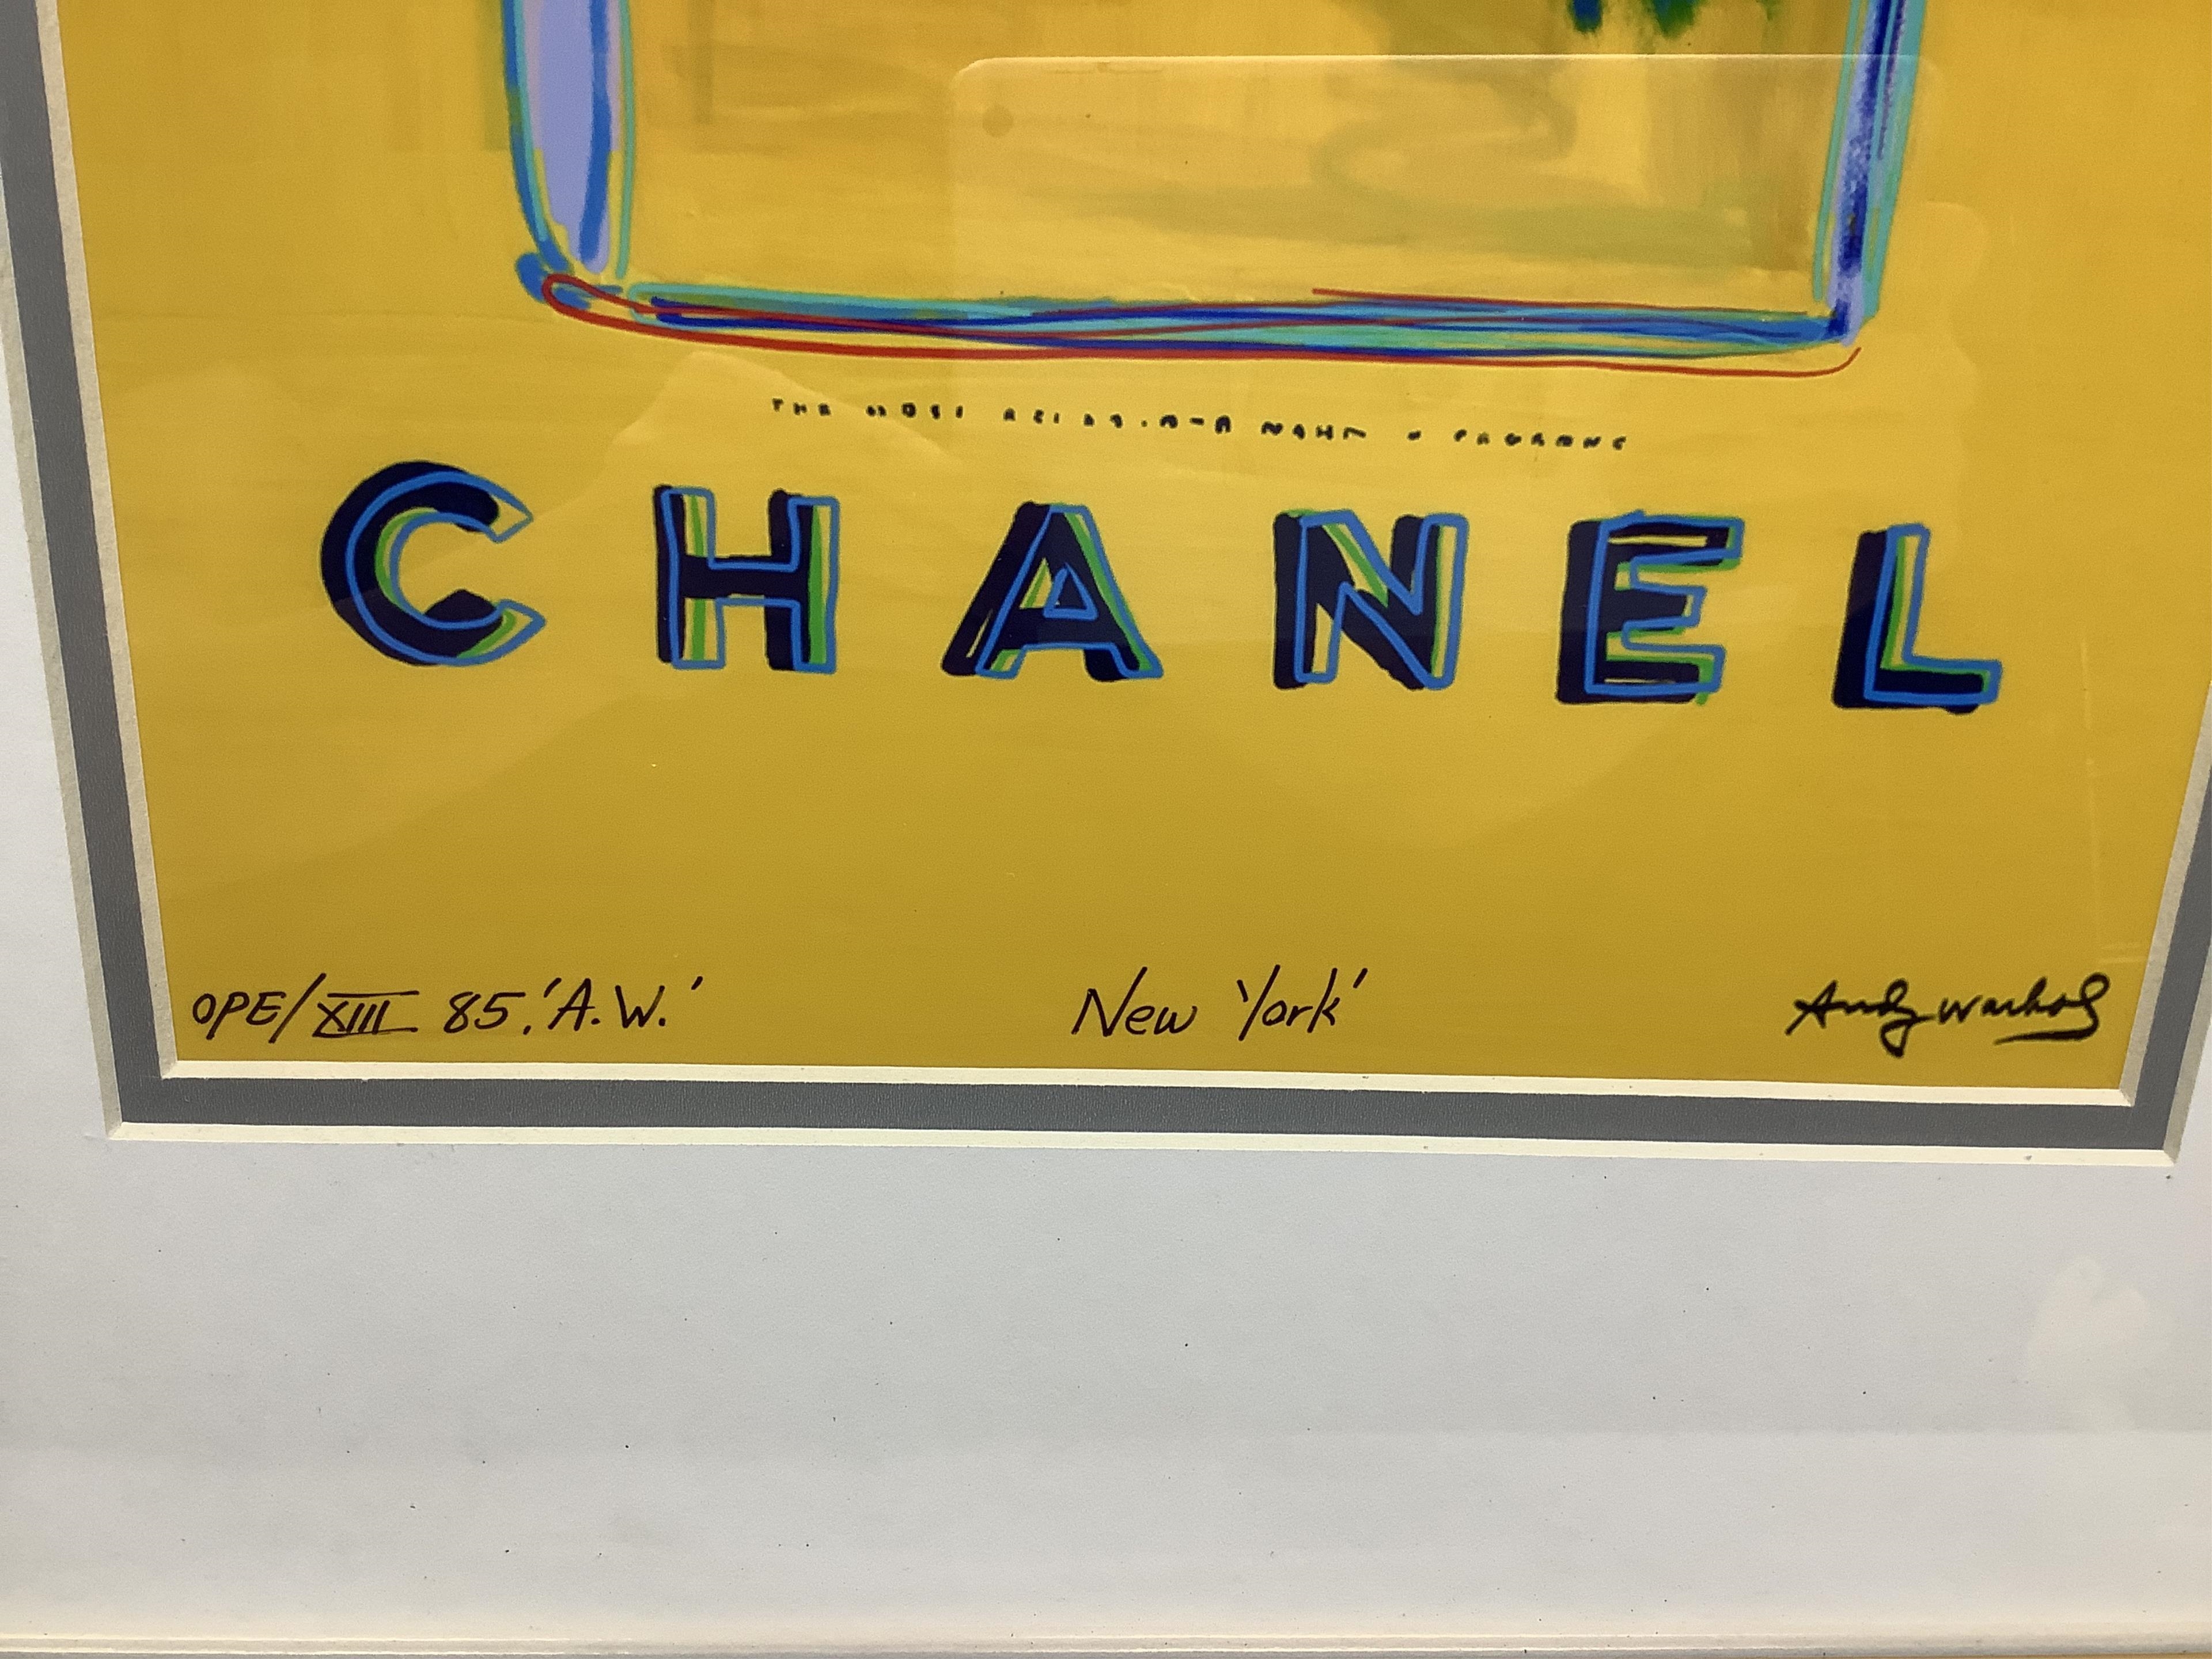 Artwork by Andy Warhol, Chanel No.5, Made of Lithograph